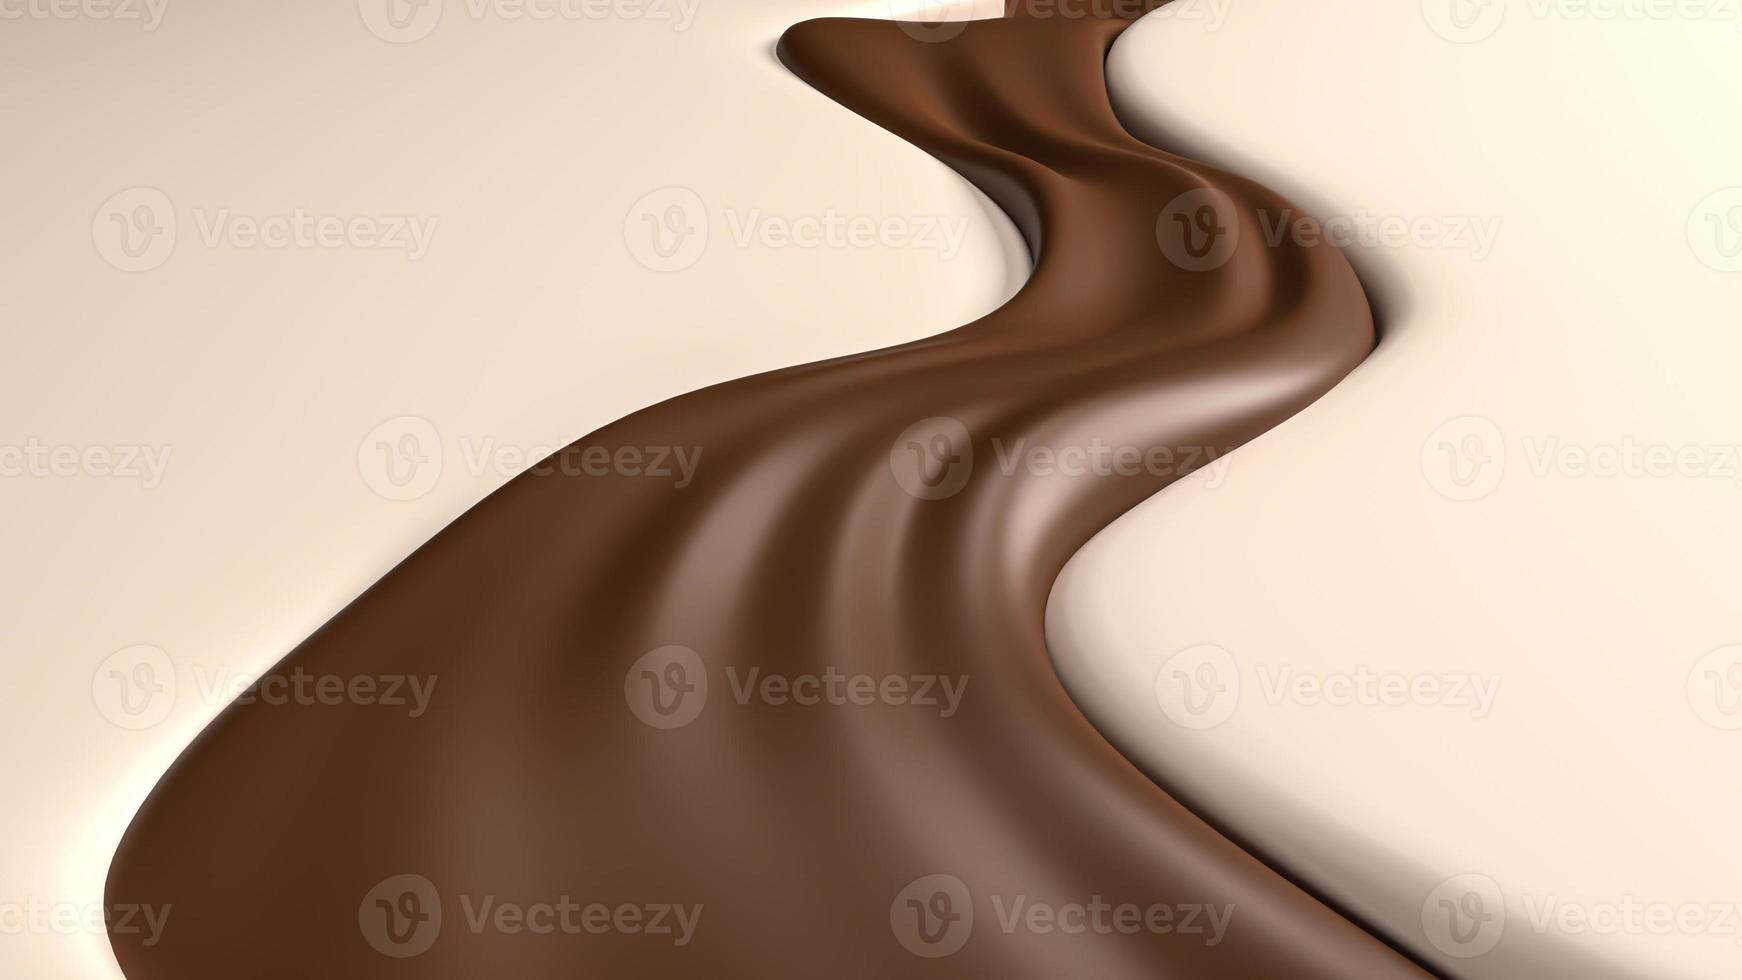 3d rendering of wave of dark Chocolate or Cocoa splash, Caramel Background, Abstract background, 3D illustration photo